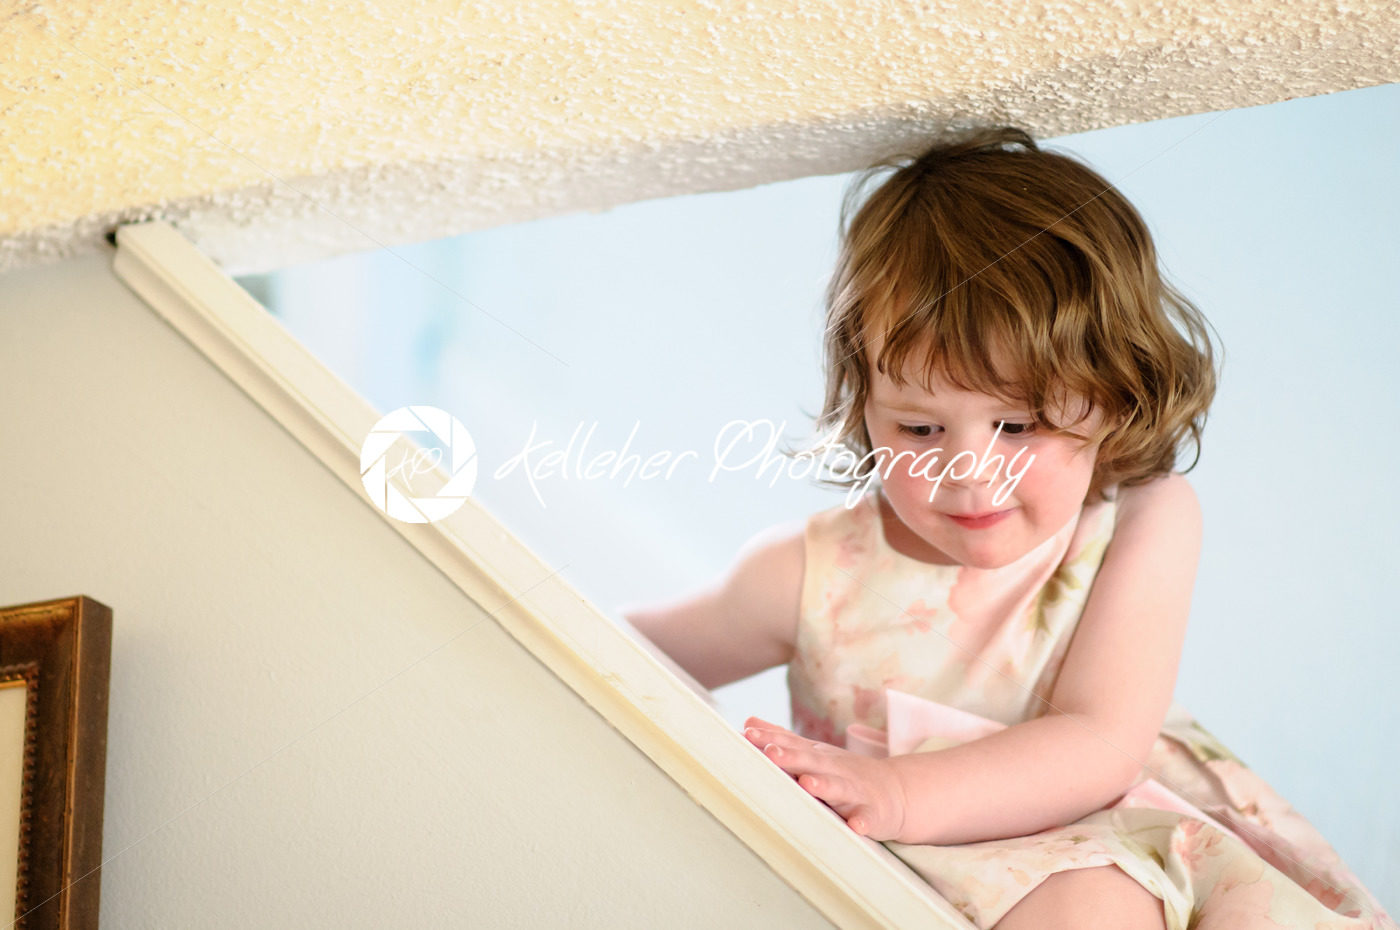 Portrait of a cute little girl inside on stairs - Kelleher Photography Store